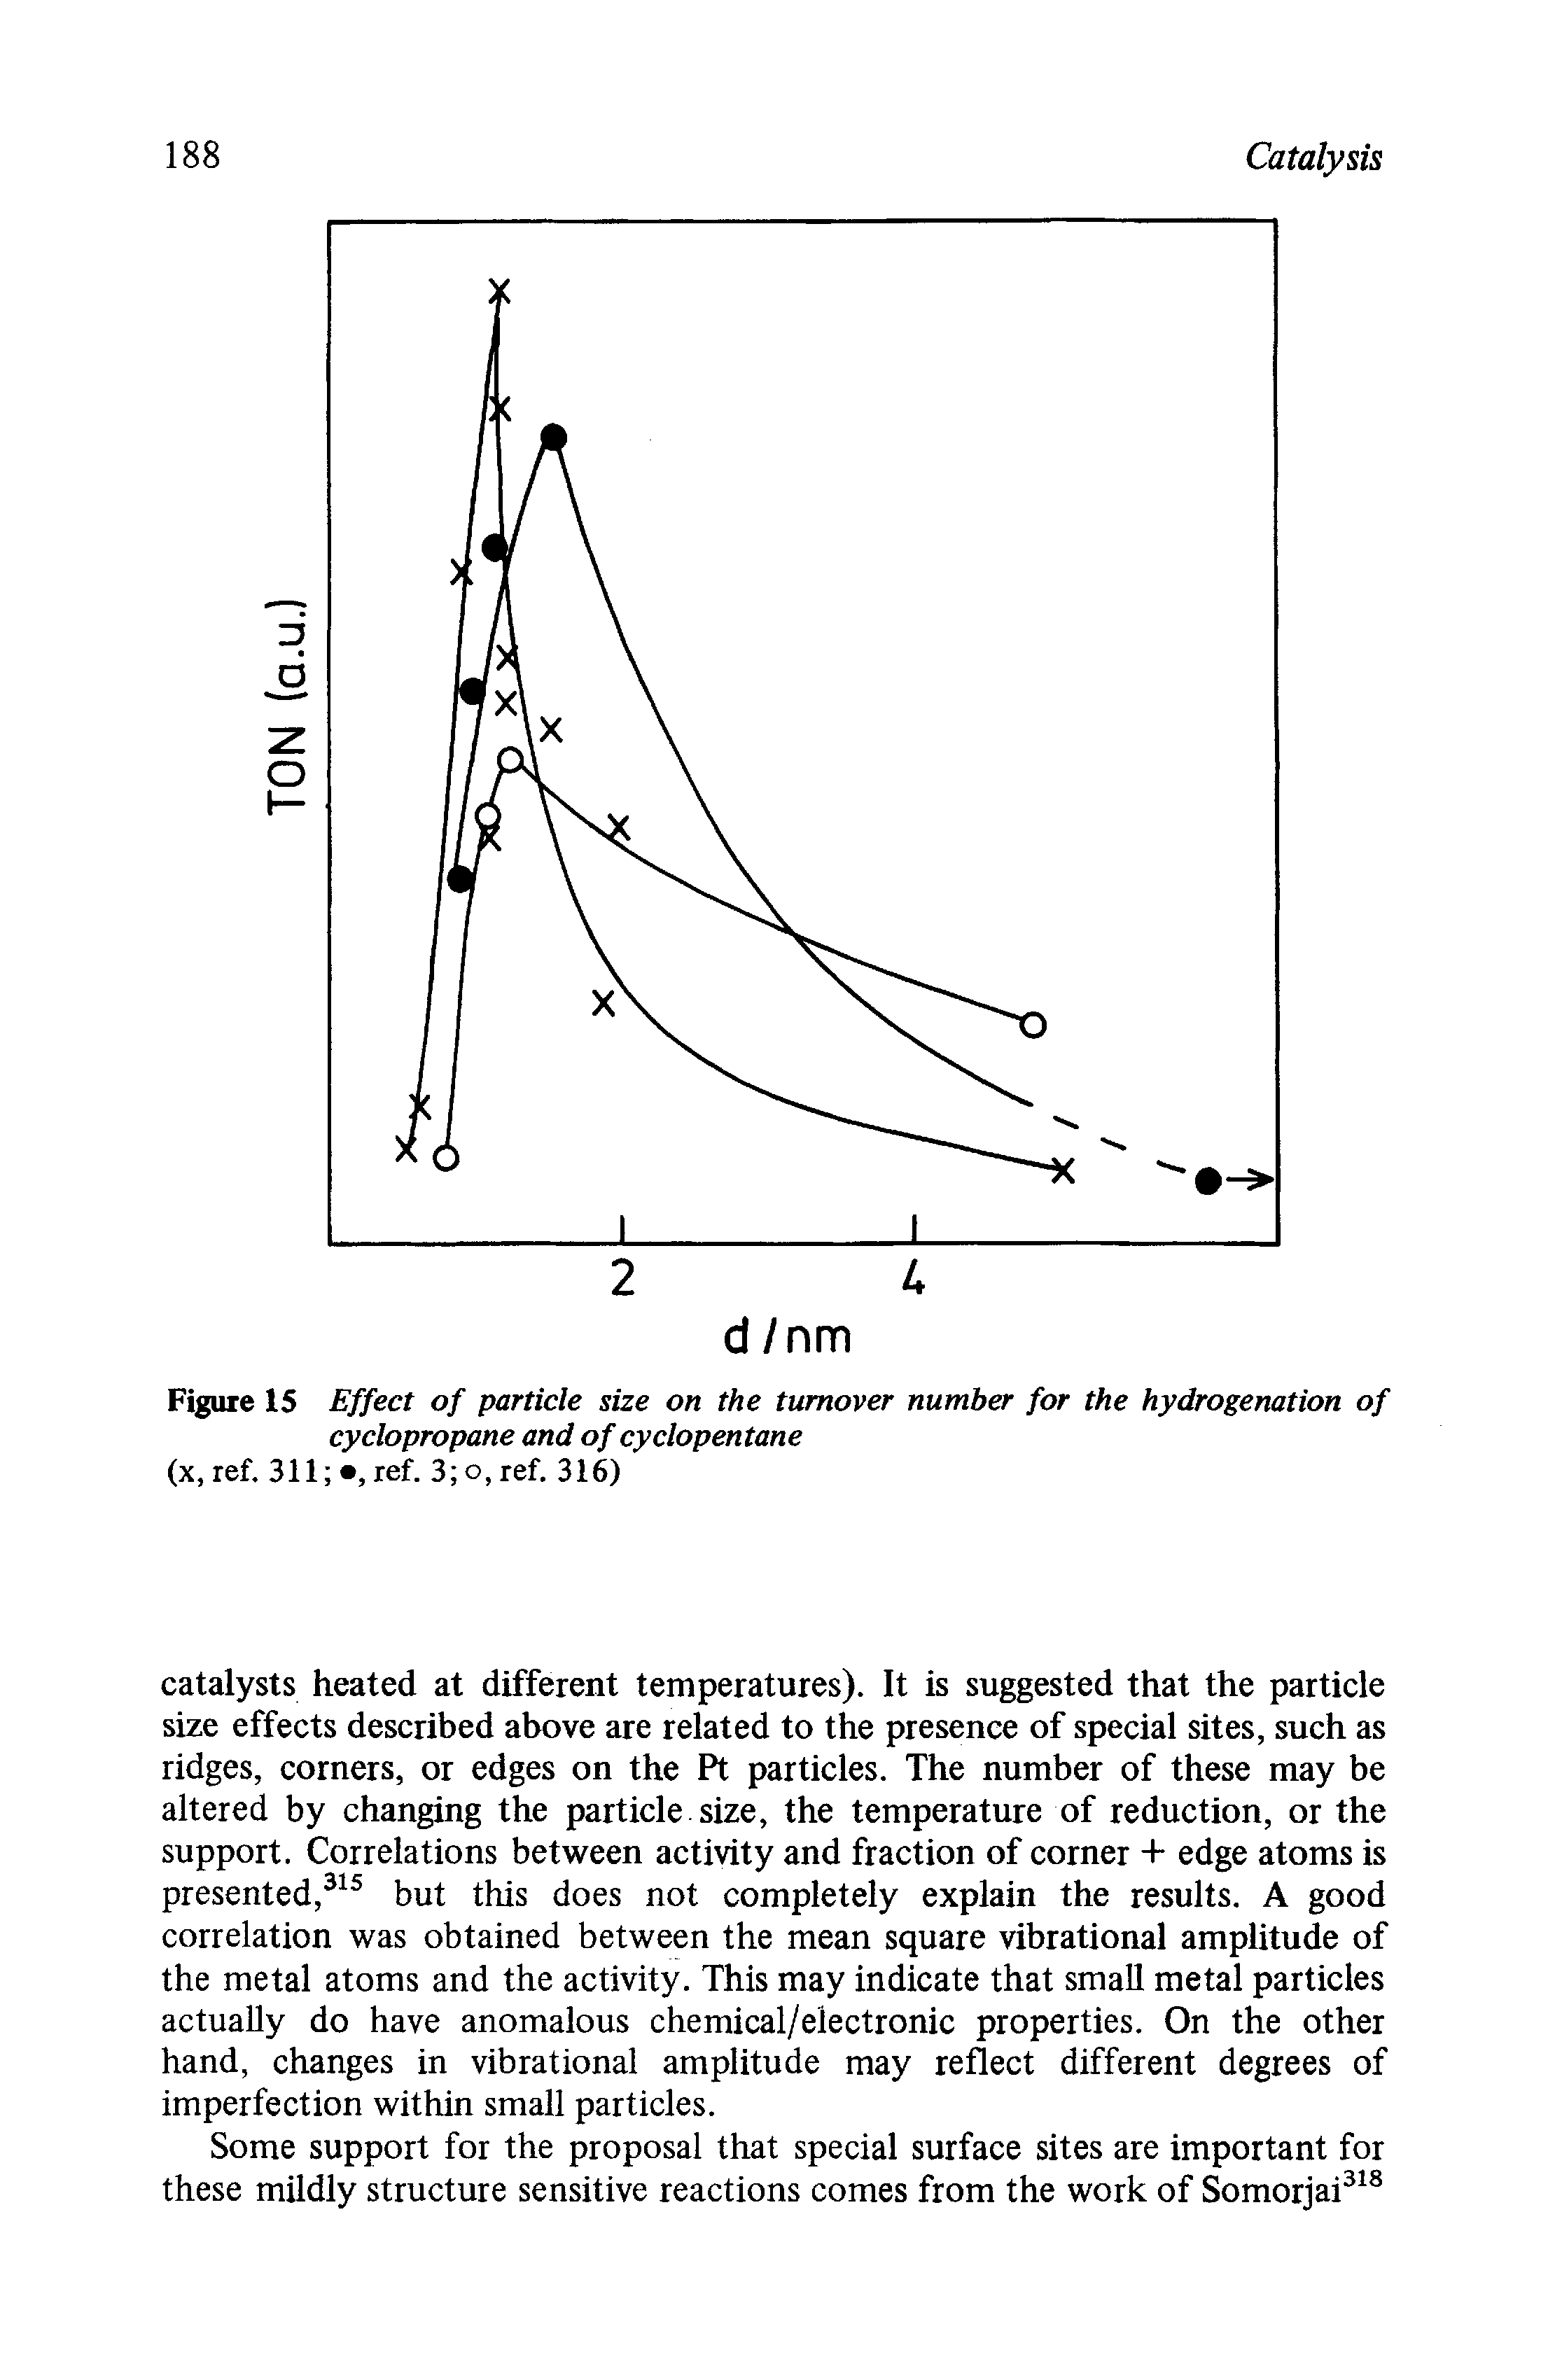 Figure 15 Effect of particle size on the turnover number for the hydrogenation of cyclopropane and of cyclopentane (x, ref. 311 , ref. 3 o,ref. 316)...